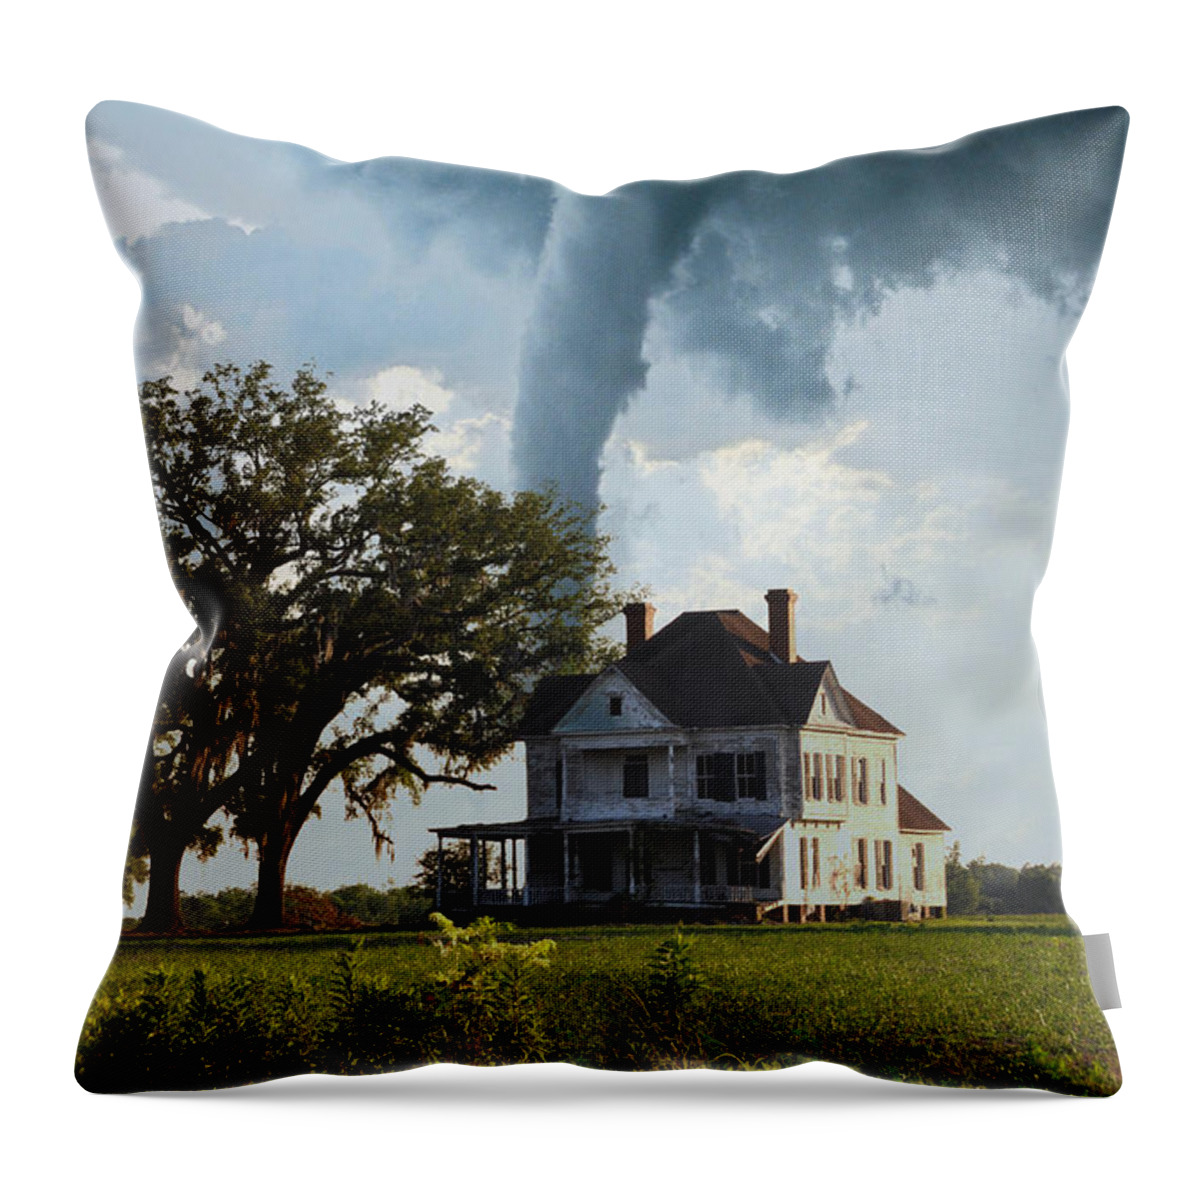 Landscapes Throw Pillow featuring the photograph I Am The Wind You Are The Feather by Jan Amiss Photography